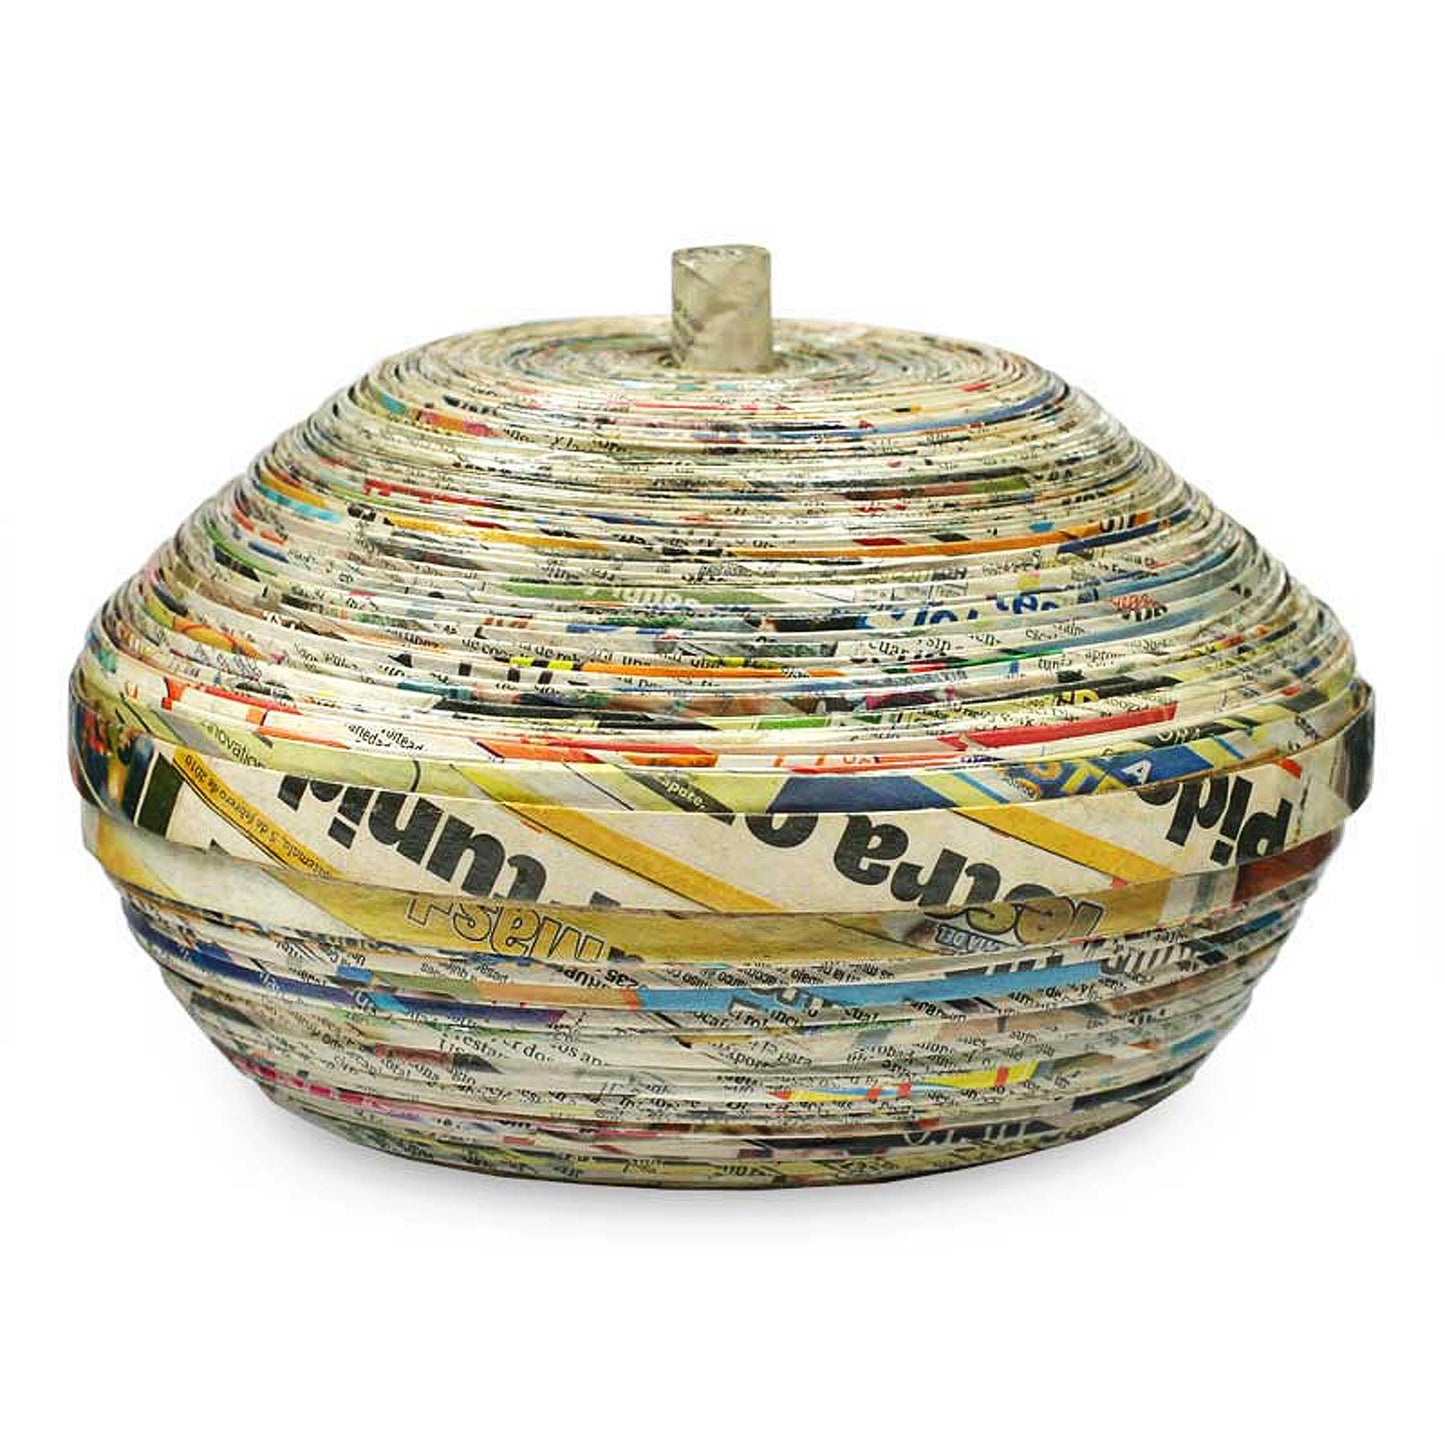 News from Guatemala Central American Modern Recycled Paper Decorative Basket